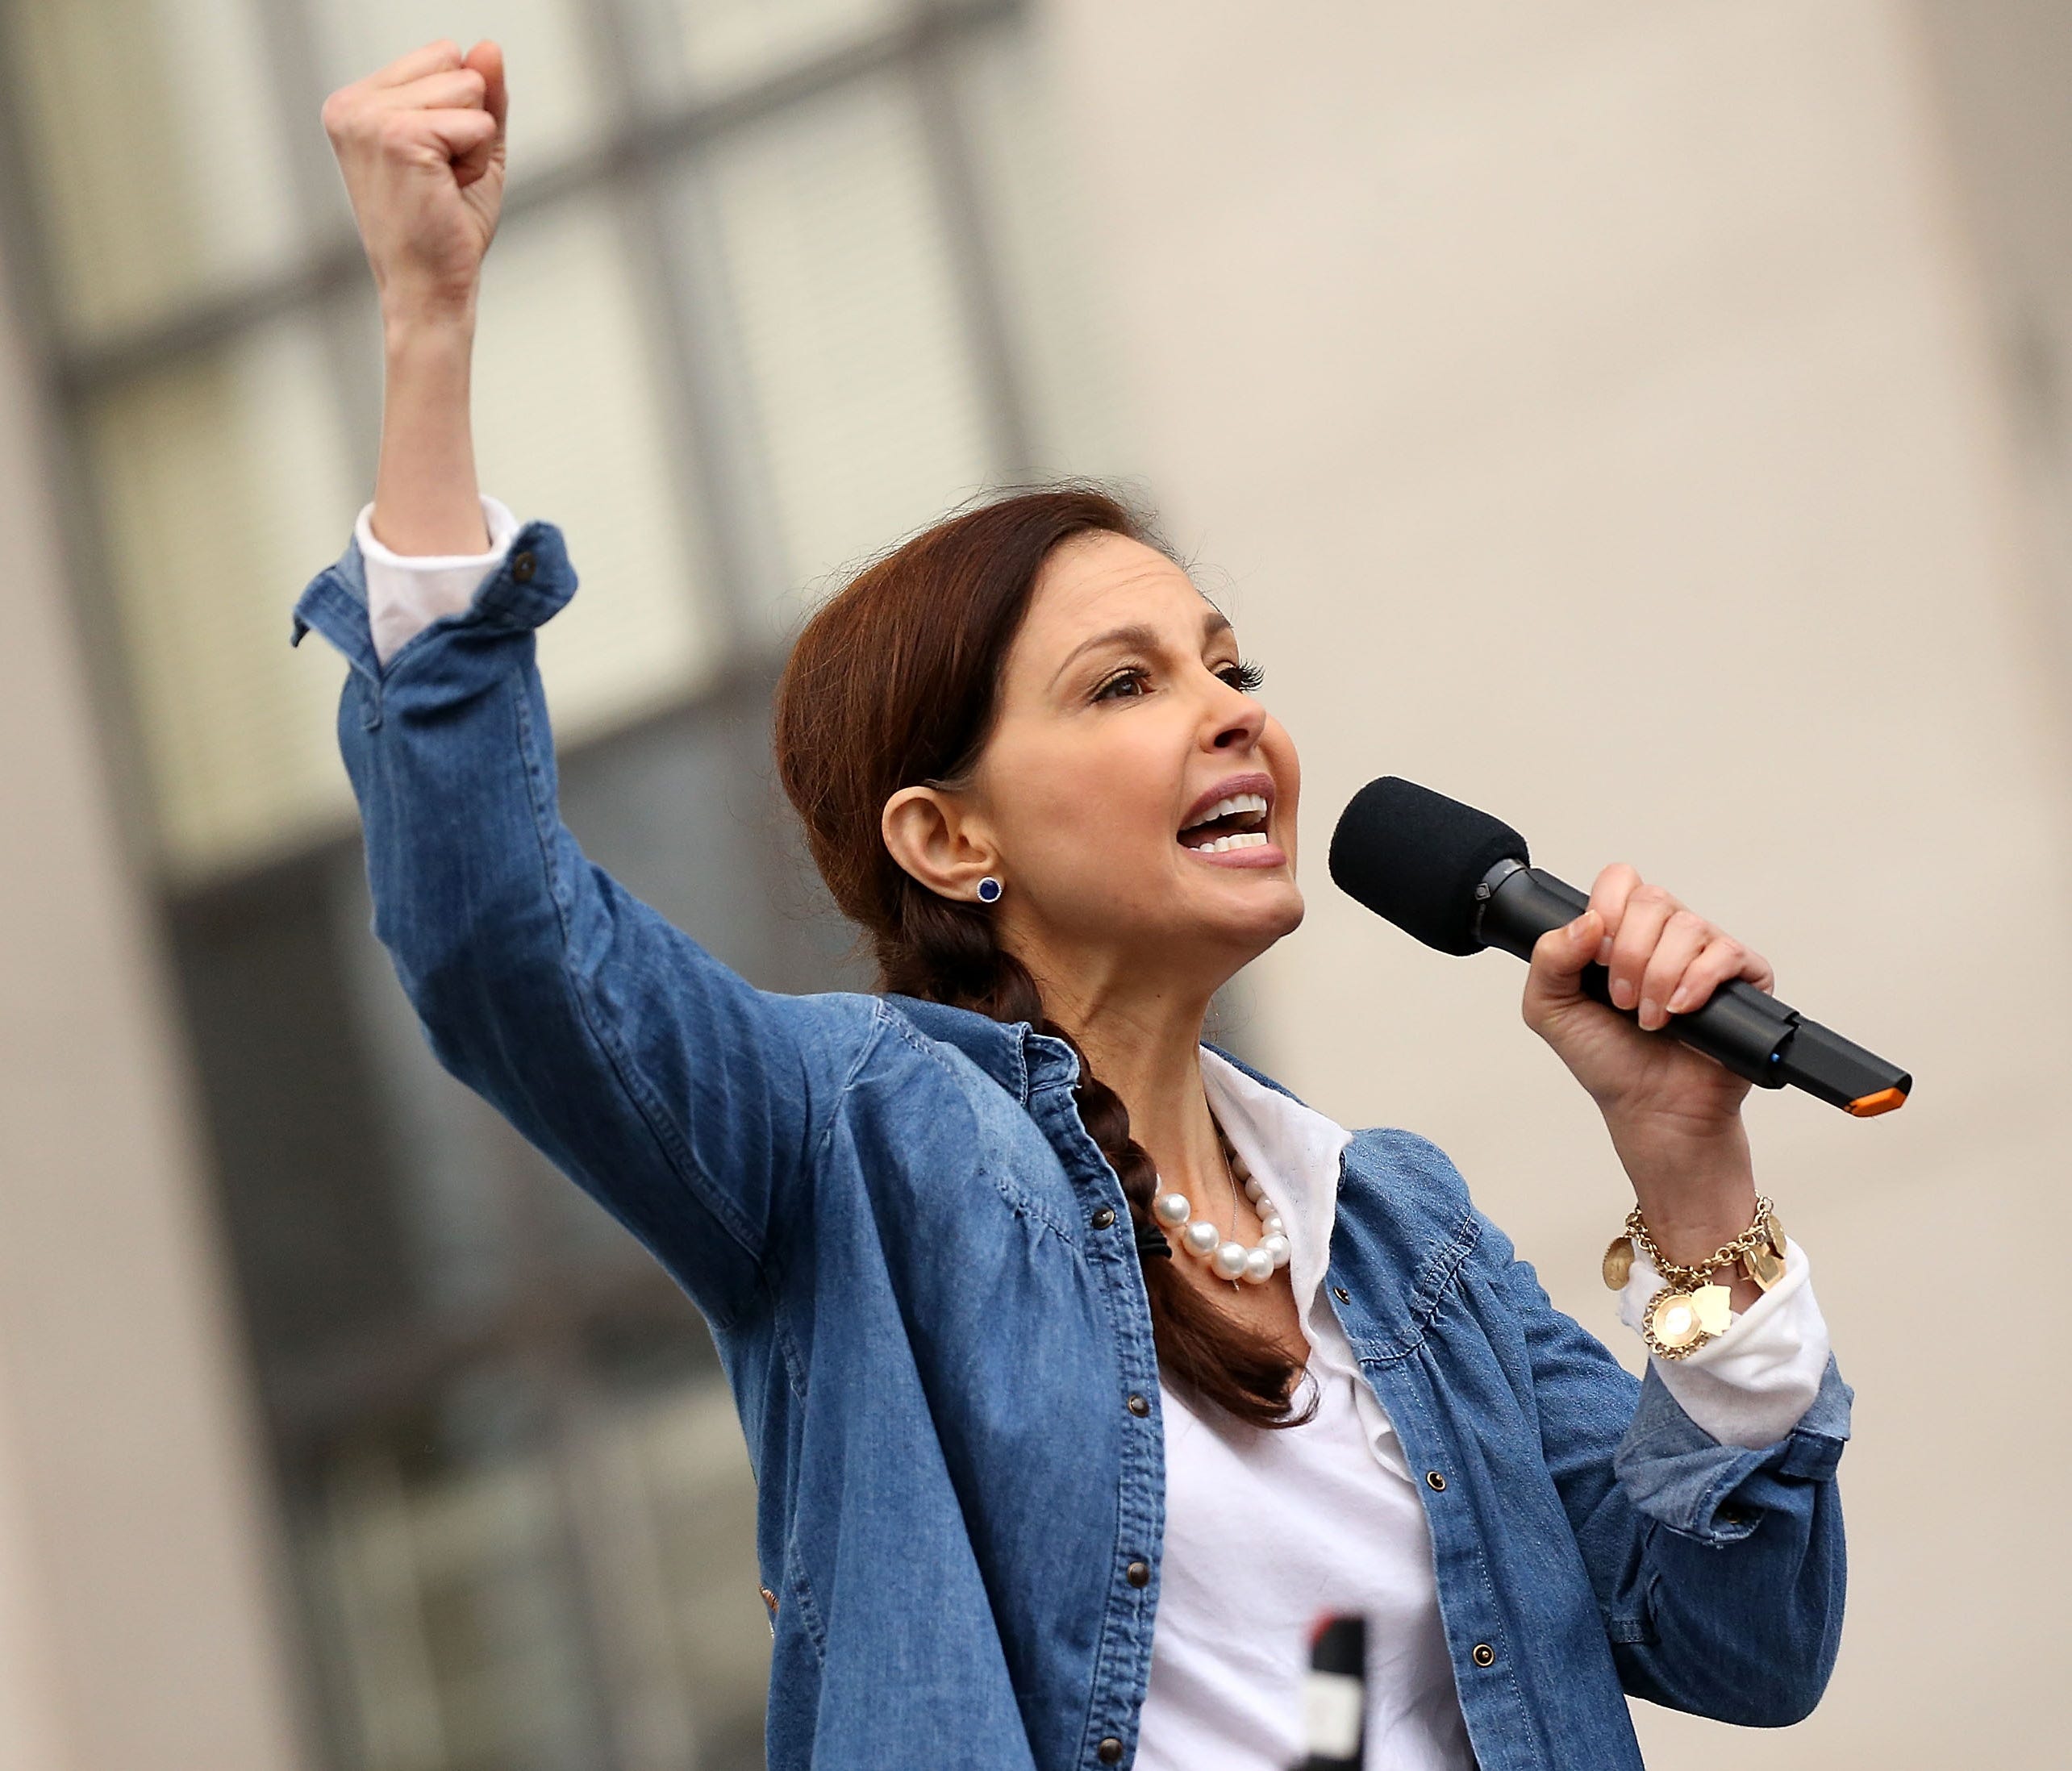 Ashley Judd was among many celebrities who participated in the rally at the Women's March on Washington on Jan. 21, 2017, in D.C.